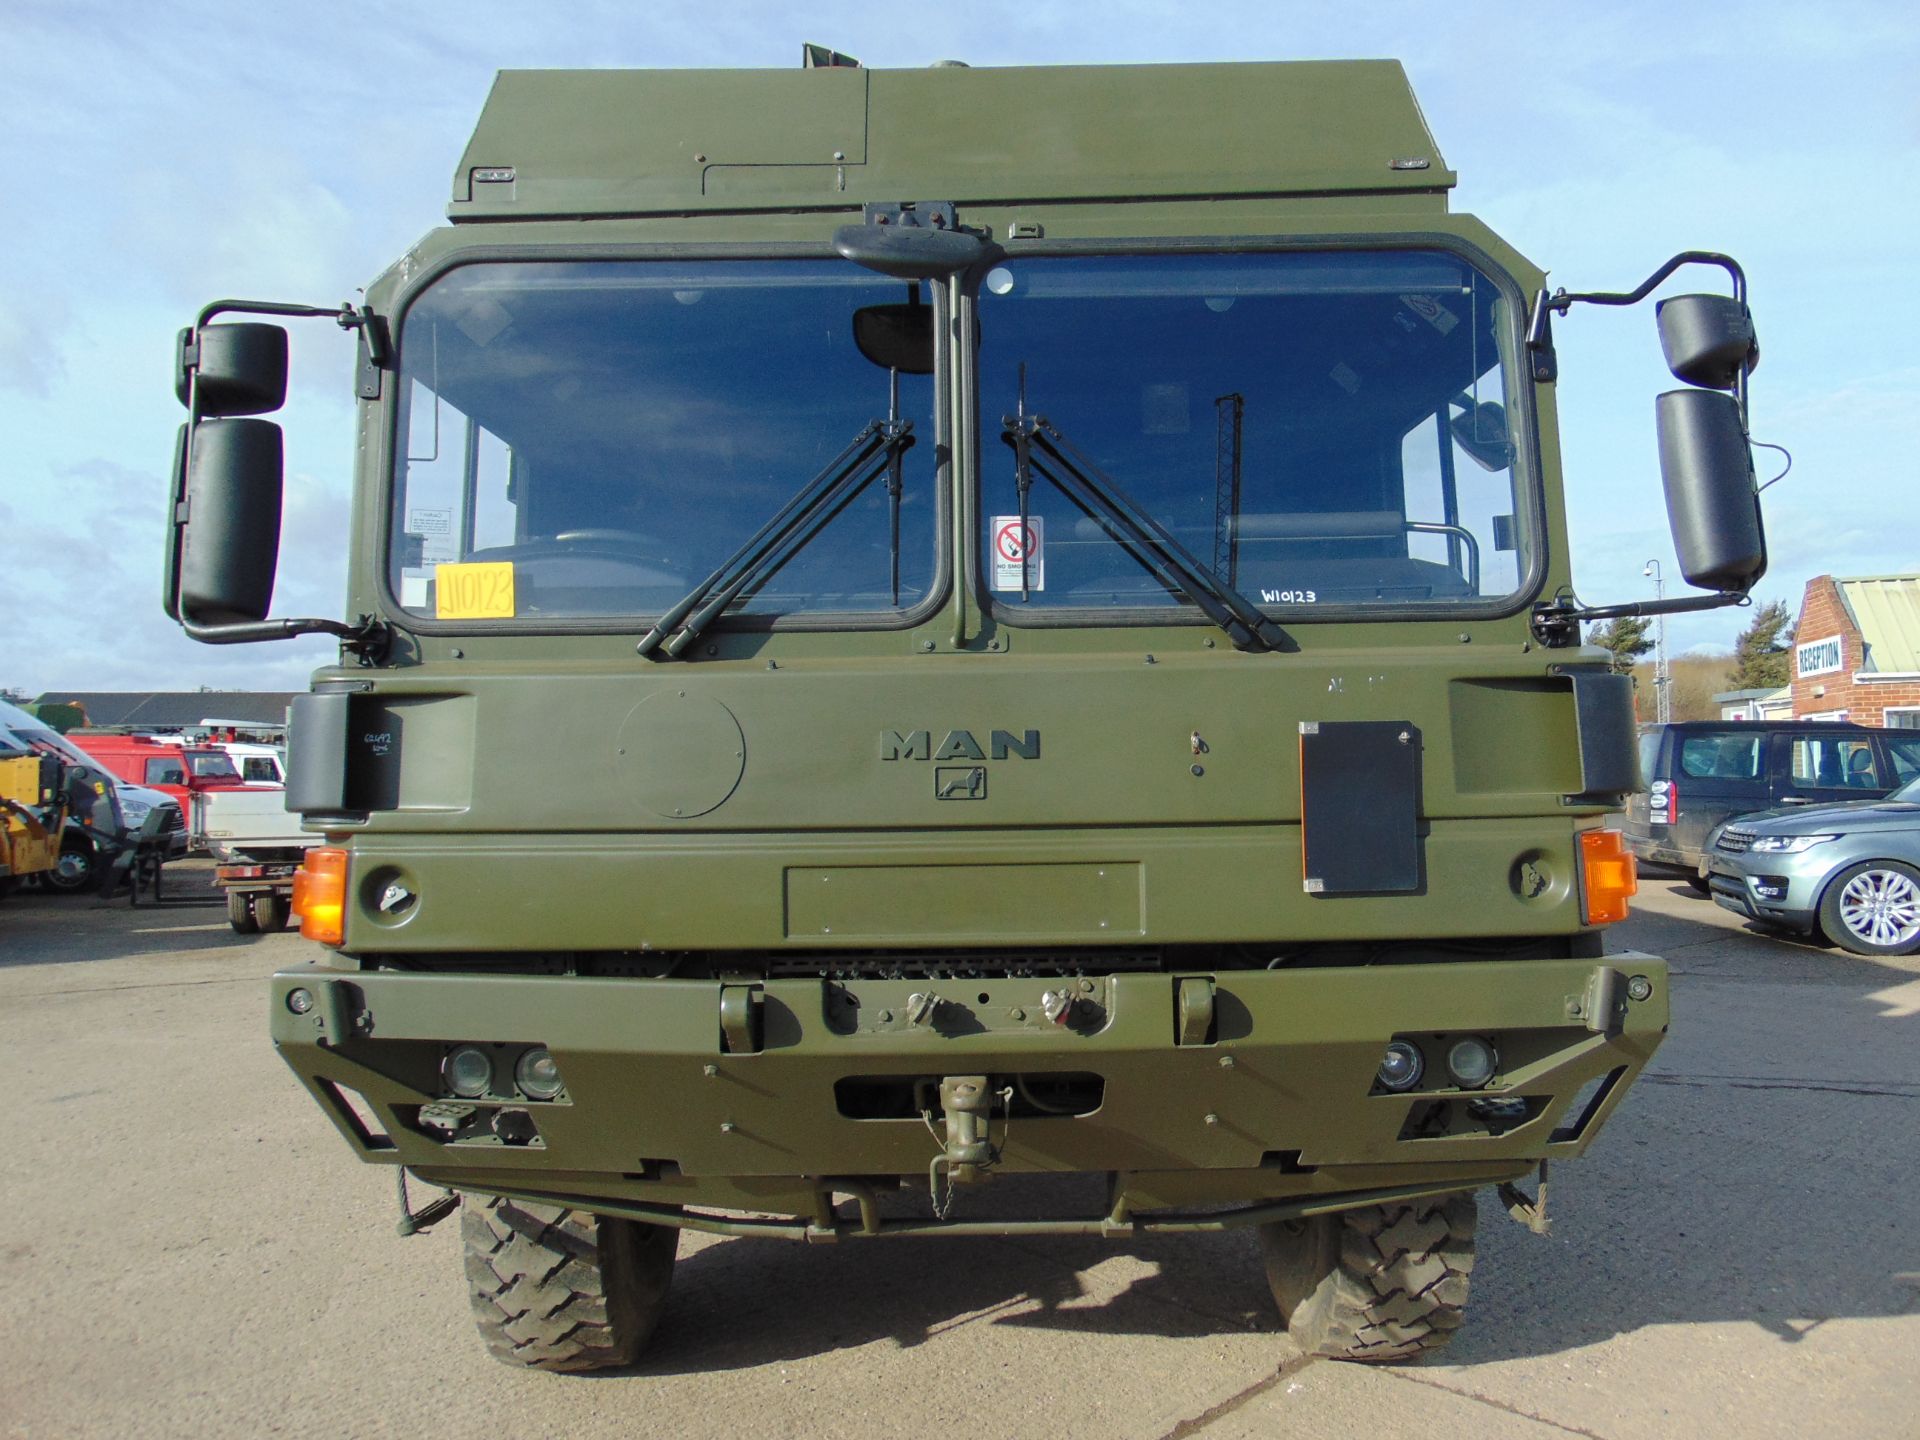 MAN 4X4 HX60 18.330 FLAT BED CARGO TRUCK ONLY 62,493 km! - Image 2 of 27